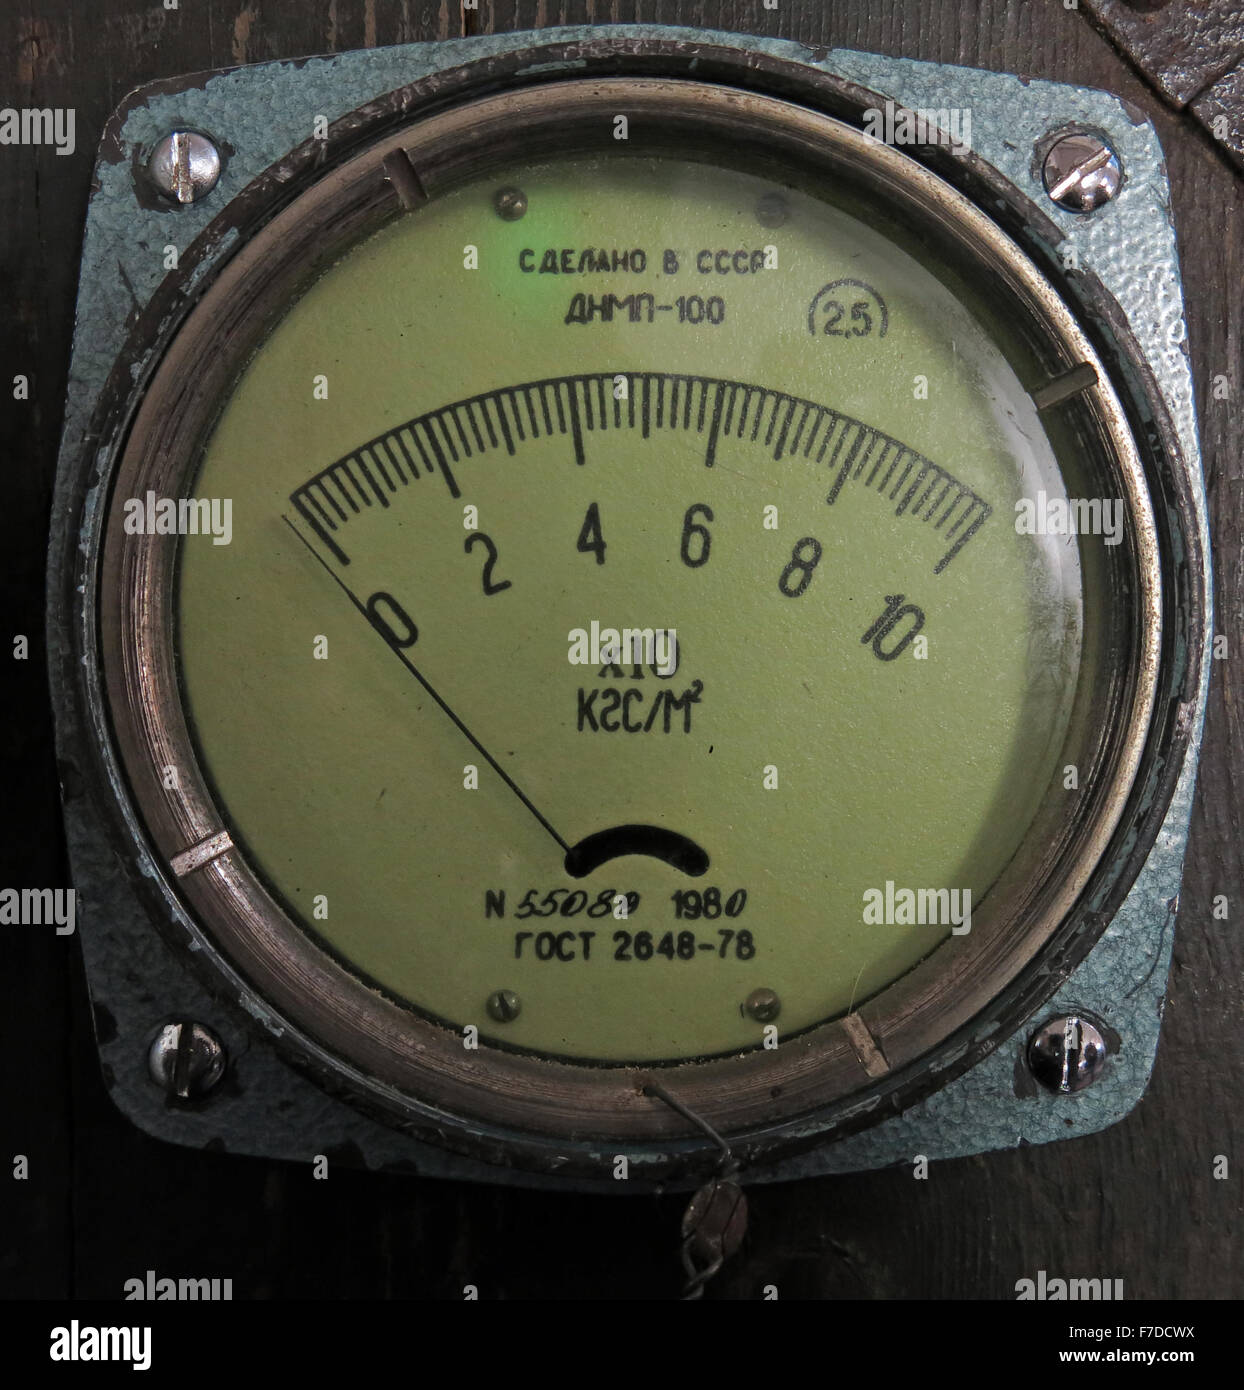 Russian Aircraft Plane Dial Indicators from USSR hardware Stock Photo